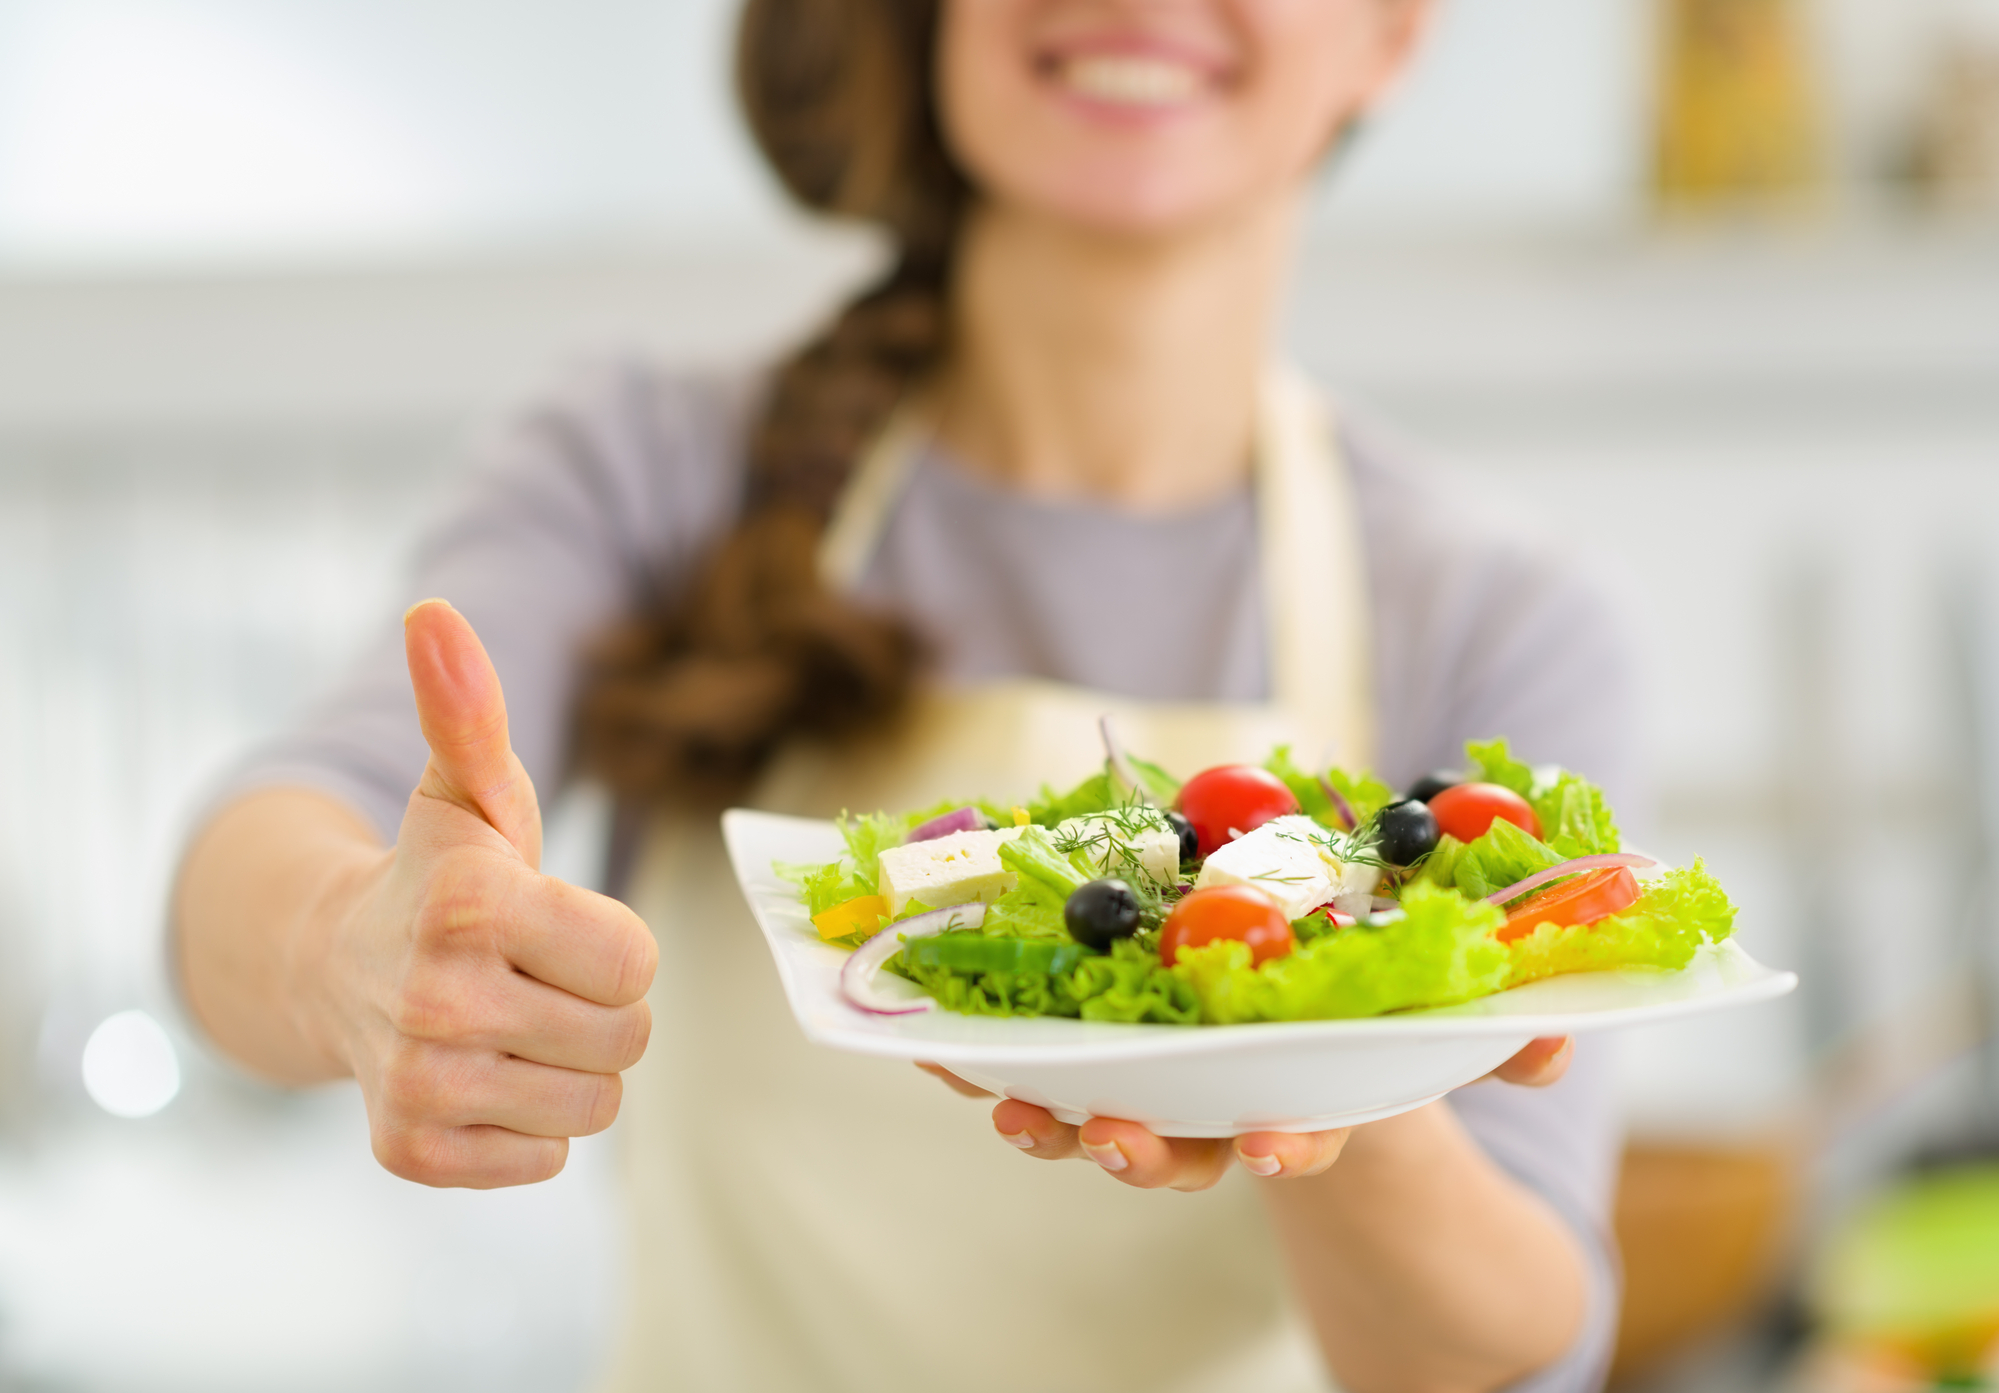 A woman serving a plate of salad